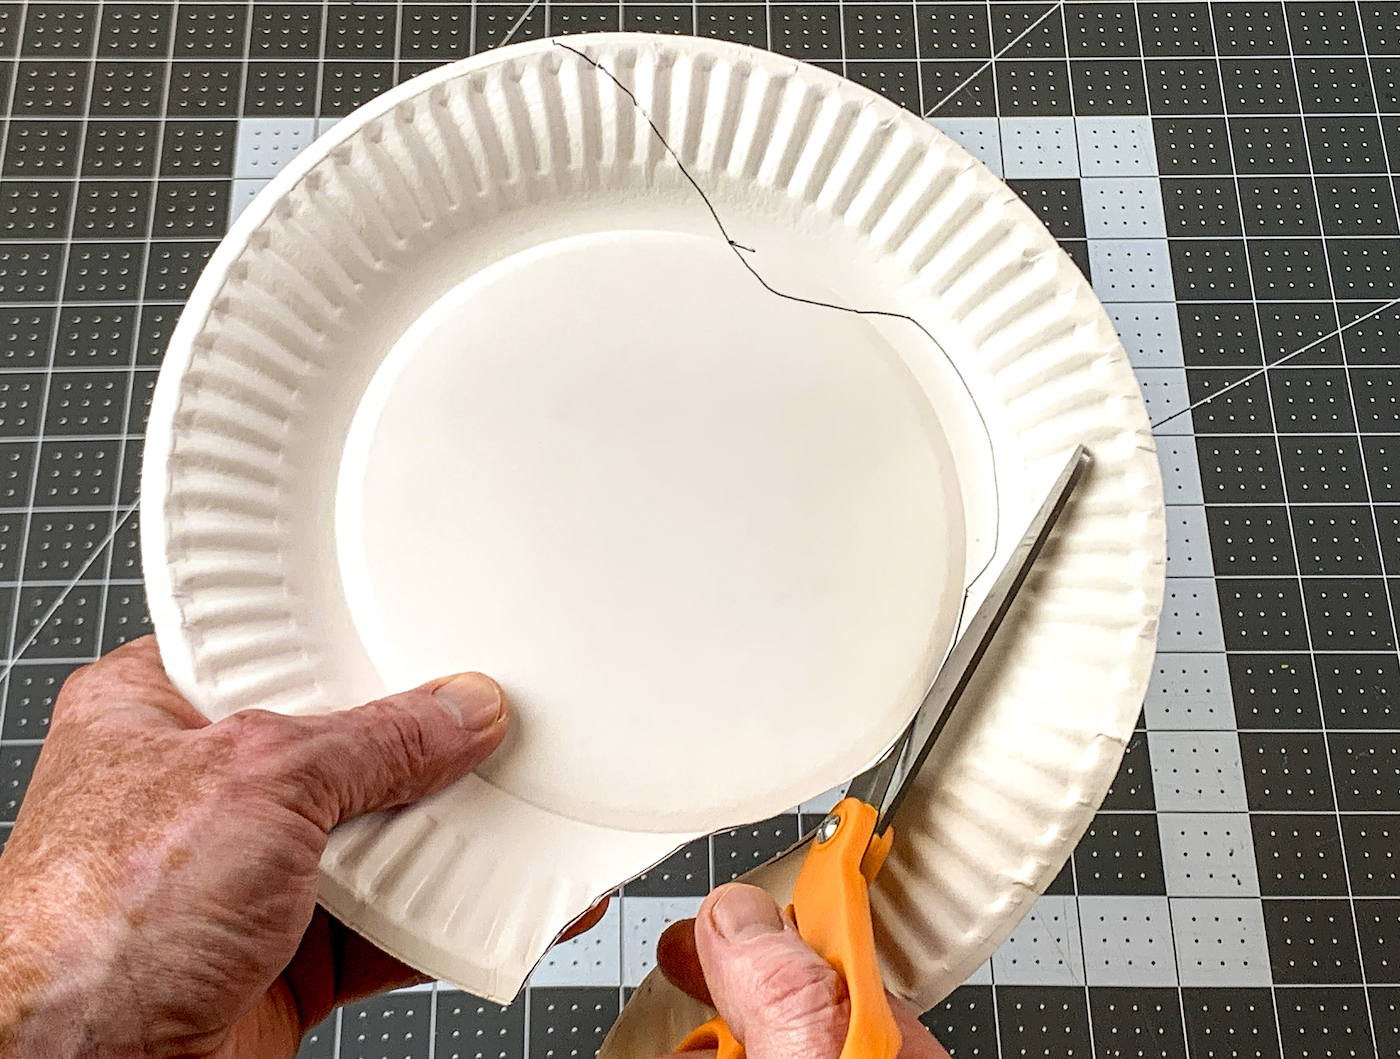 Cutting the body of the turkey out of a paper plate